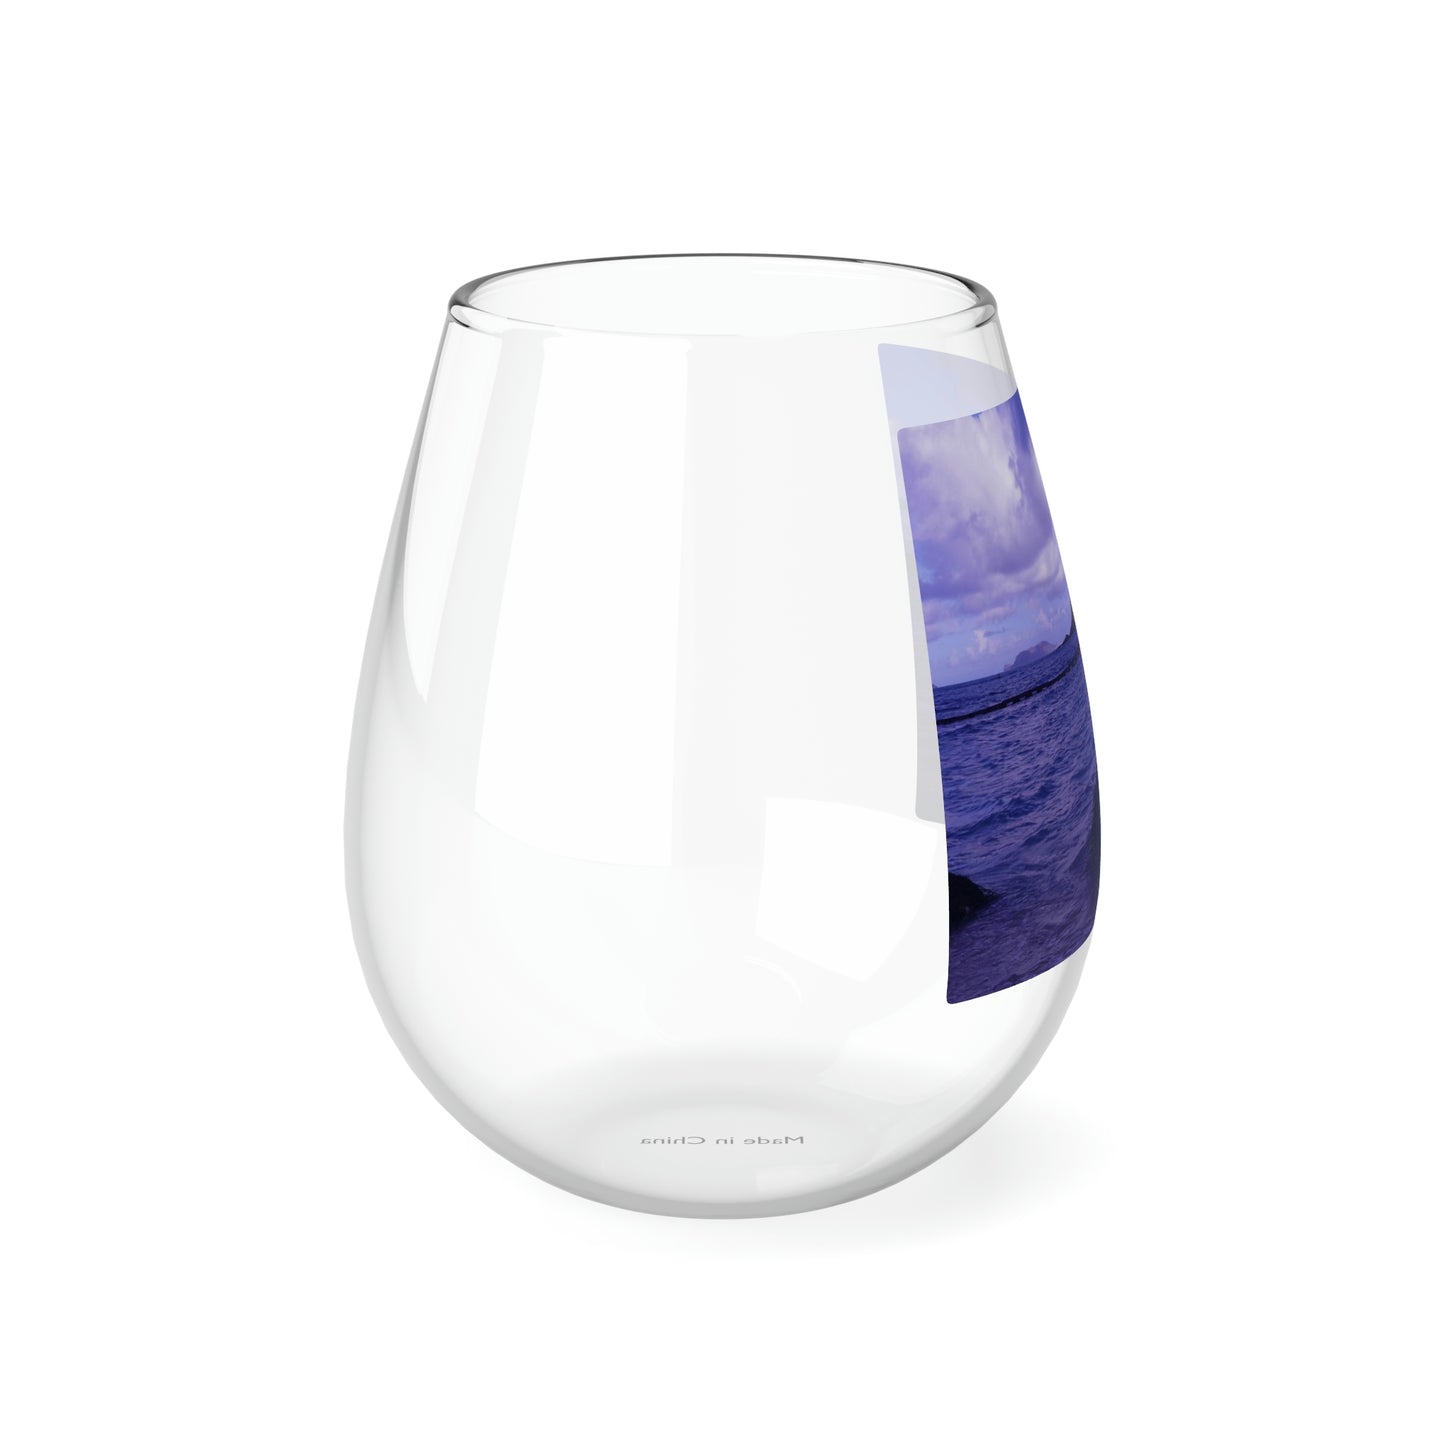 Wade To Chinaman's Hat - Stemless Wine Glass, 11.75 oz - Fry1Productions